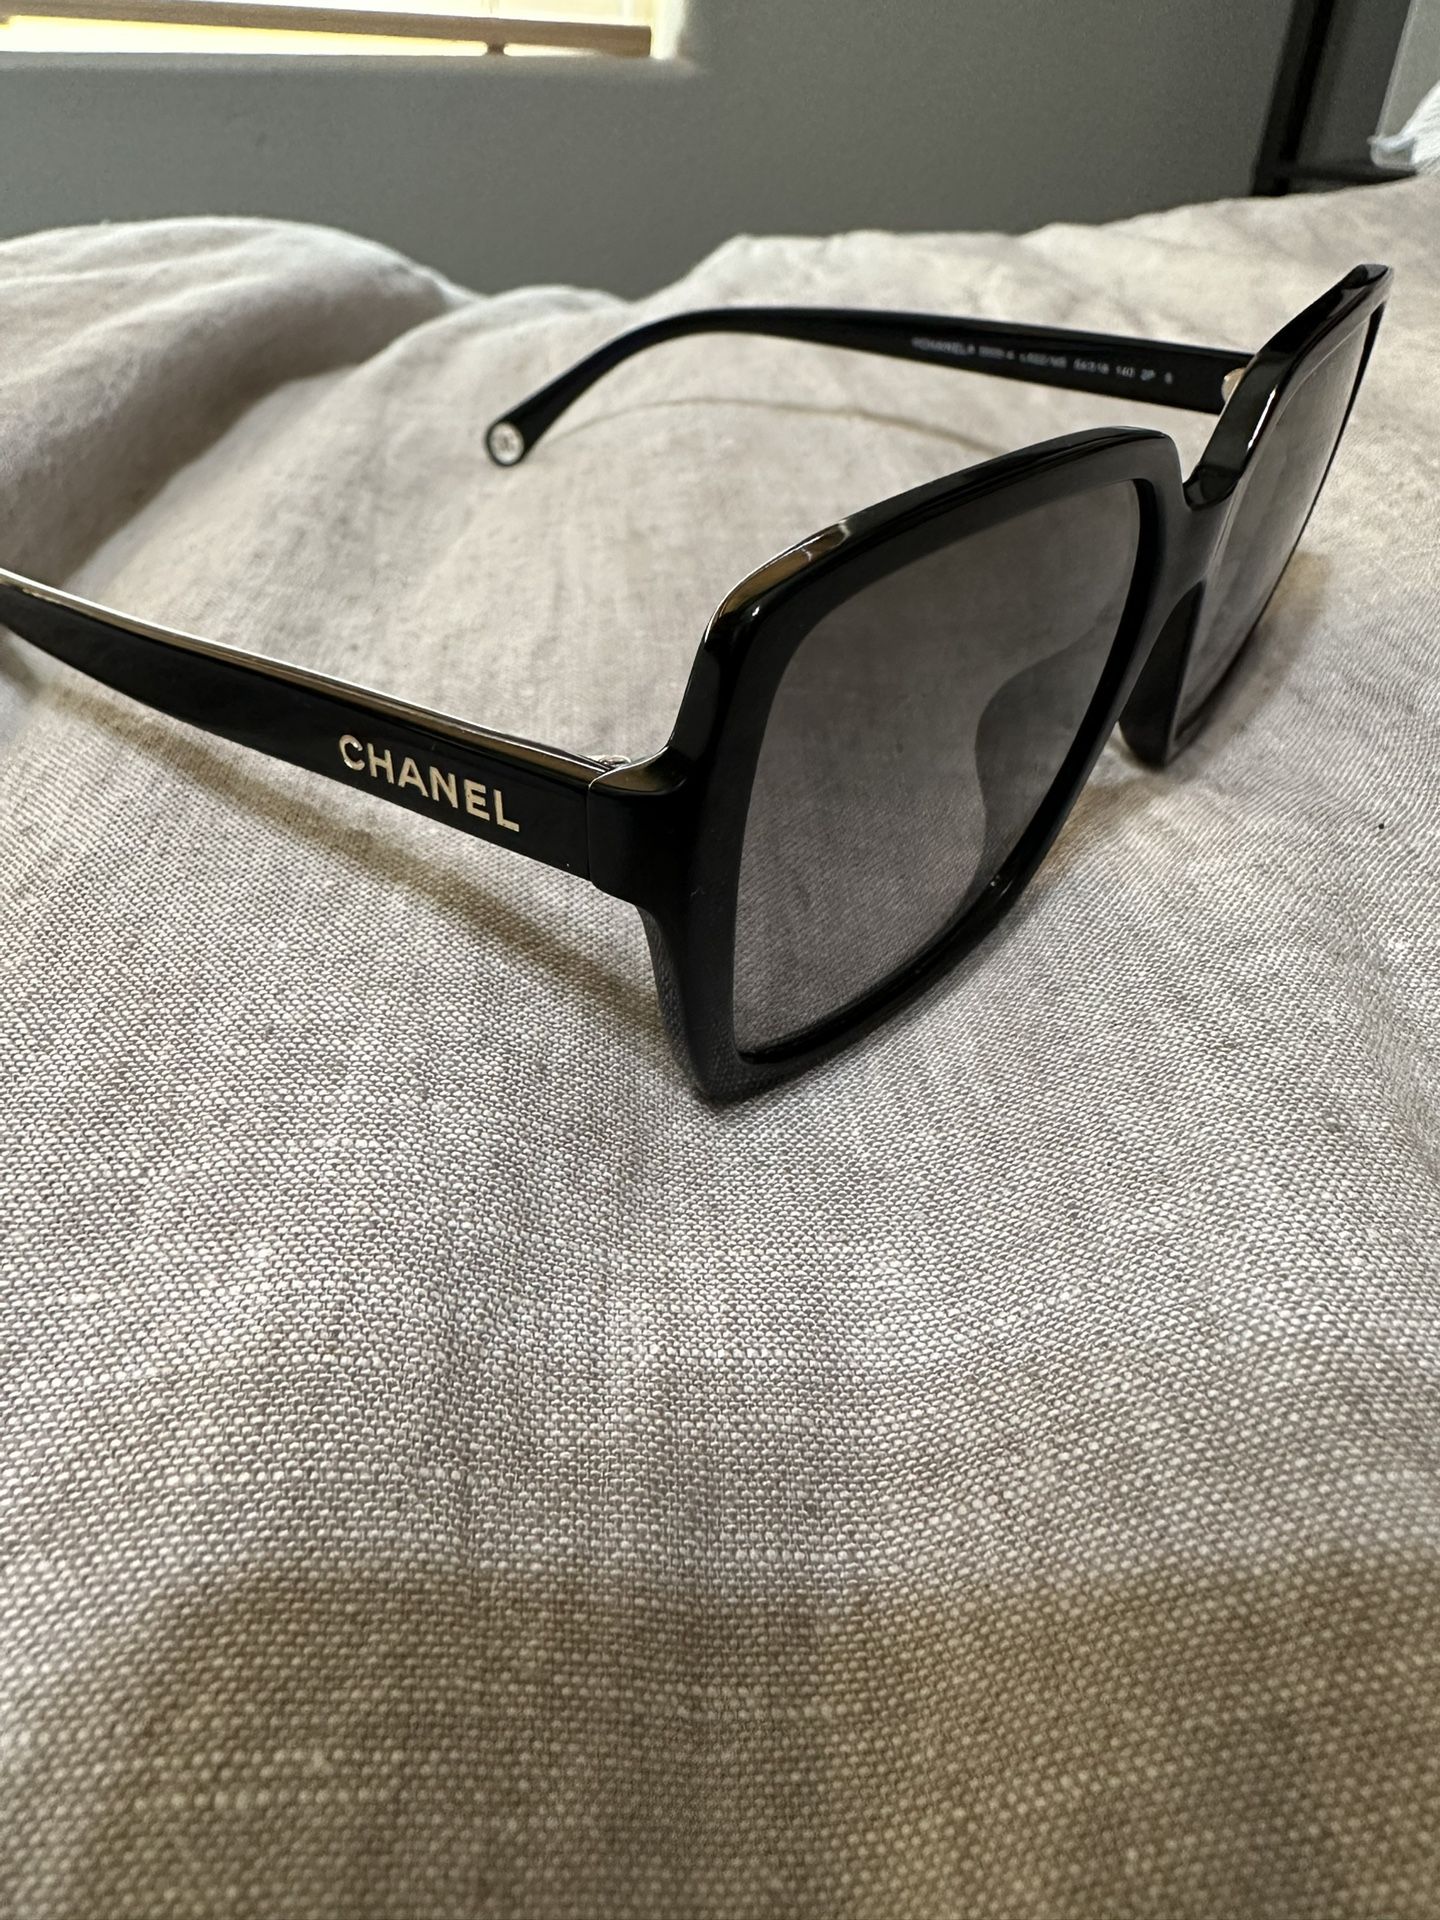 Chanel Sunglasses On Sale Up to 80% Off